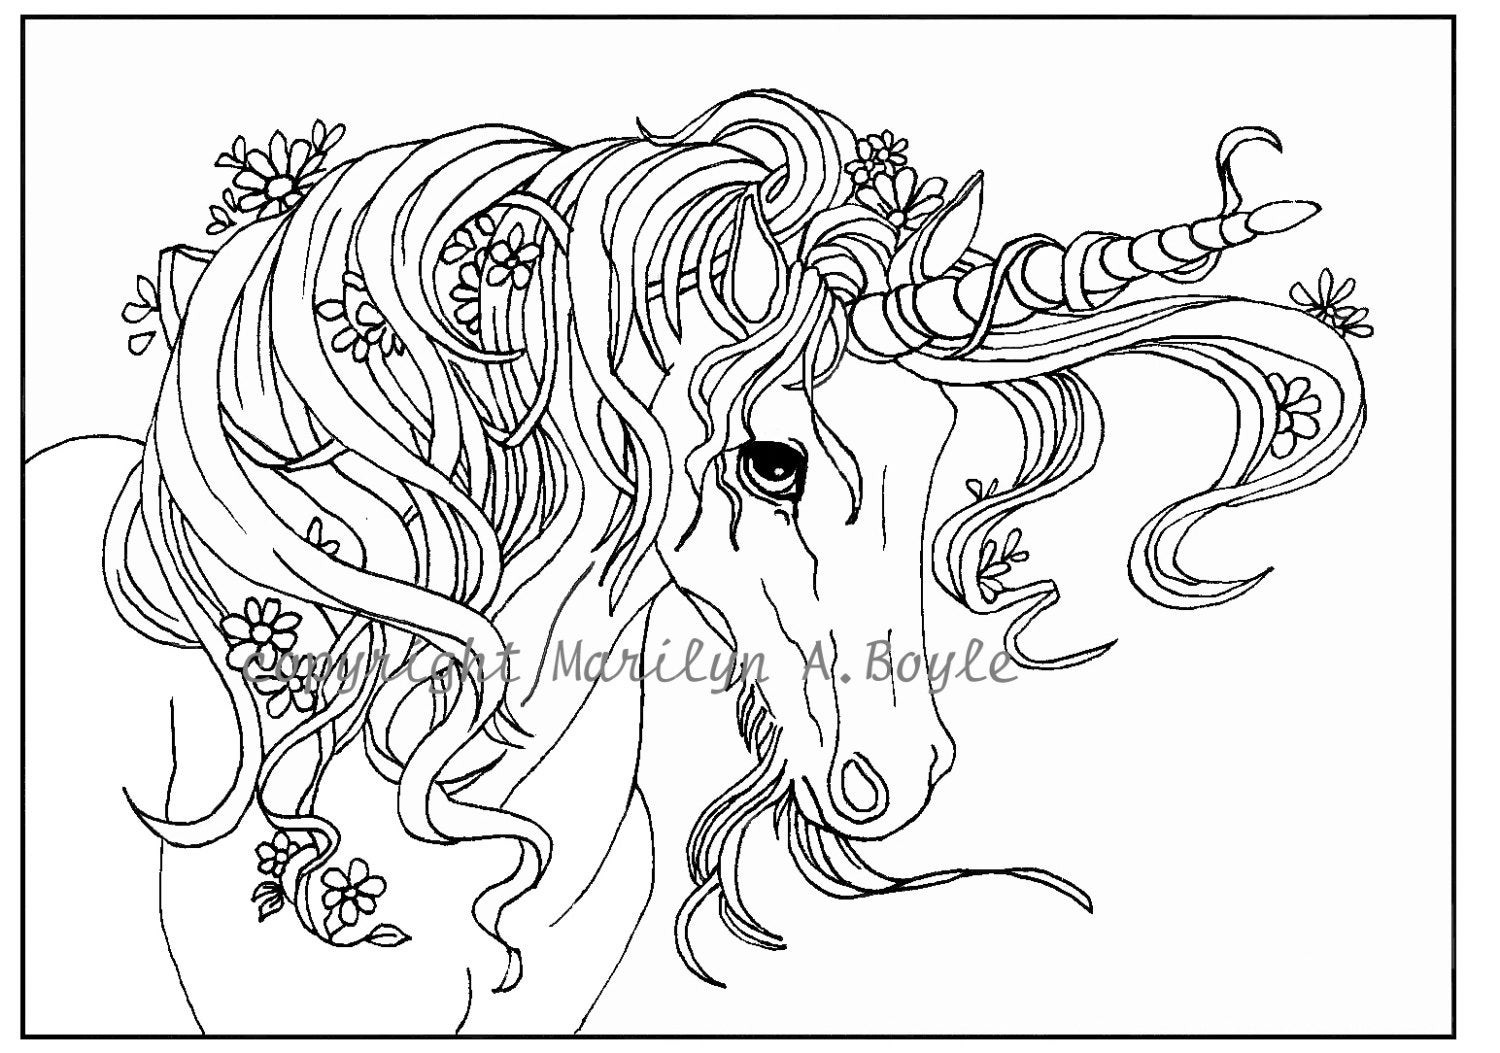 Unicorn Adult Coloring Book
 ADULT COLORING Page digital Unicorn flowers